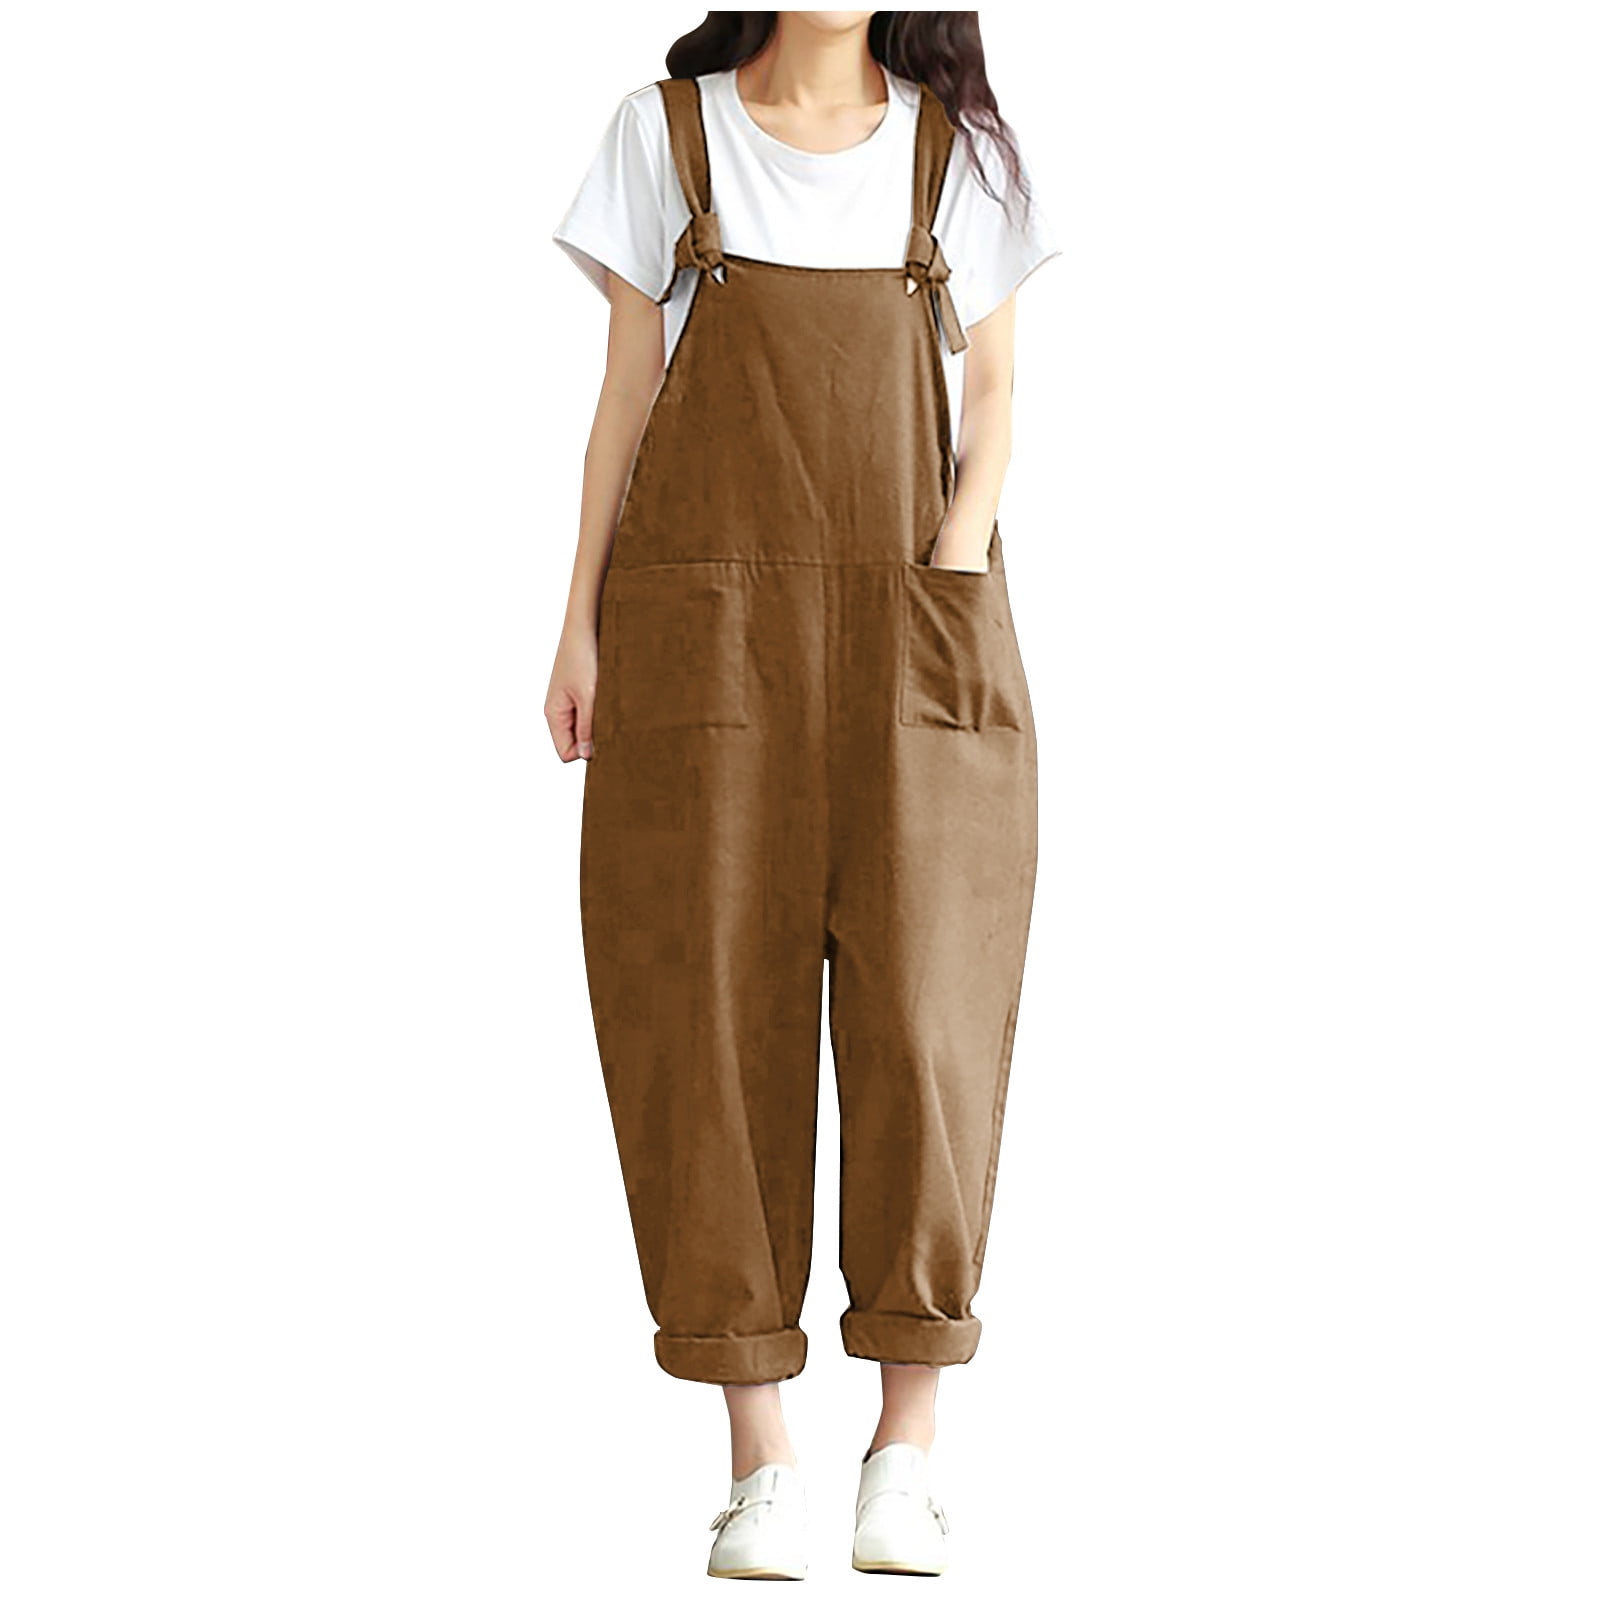 Zodggu Womens Fashion Solid Summer 2023 Trendy Casual Camis Pocket  Sleeveless Sling Strap Jumpsuit Comfy Dressy Young Girls Love Boho Yoga  Carpenter One-piece Suits Coffee XL 